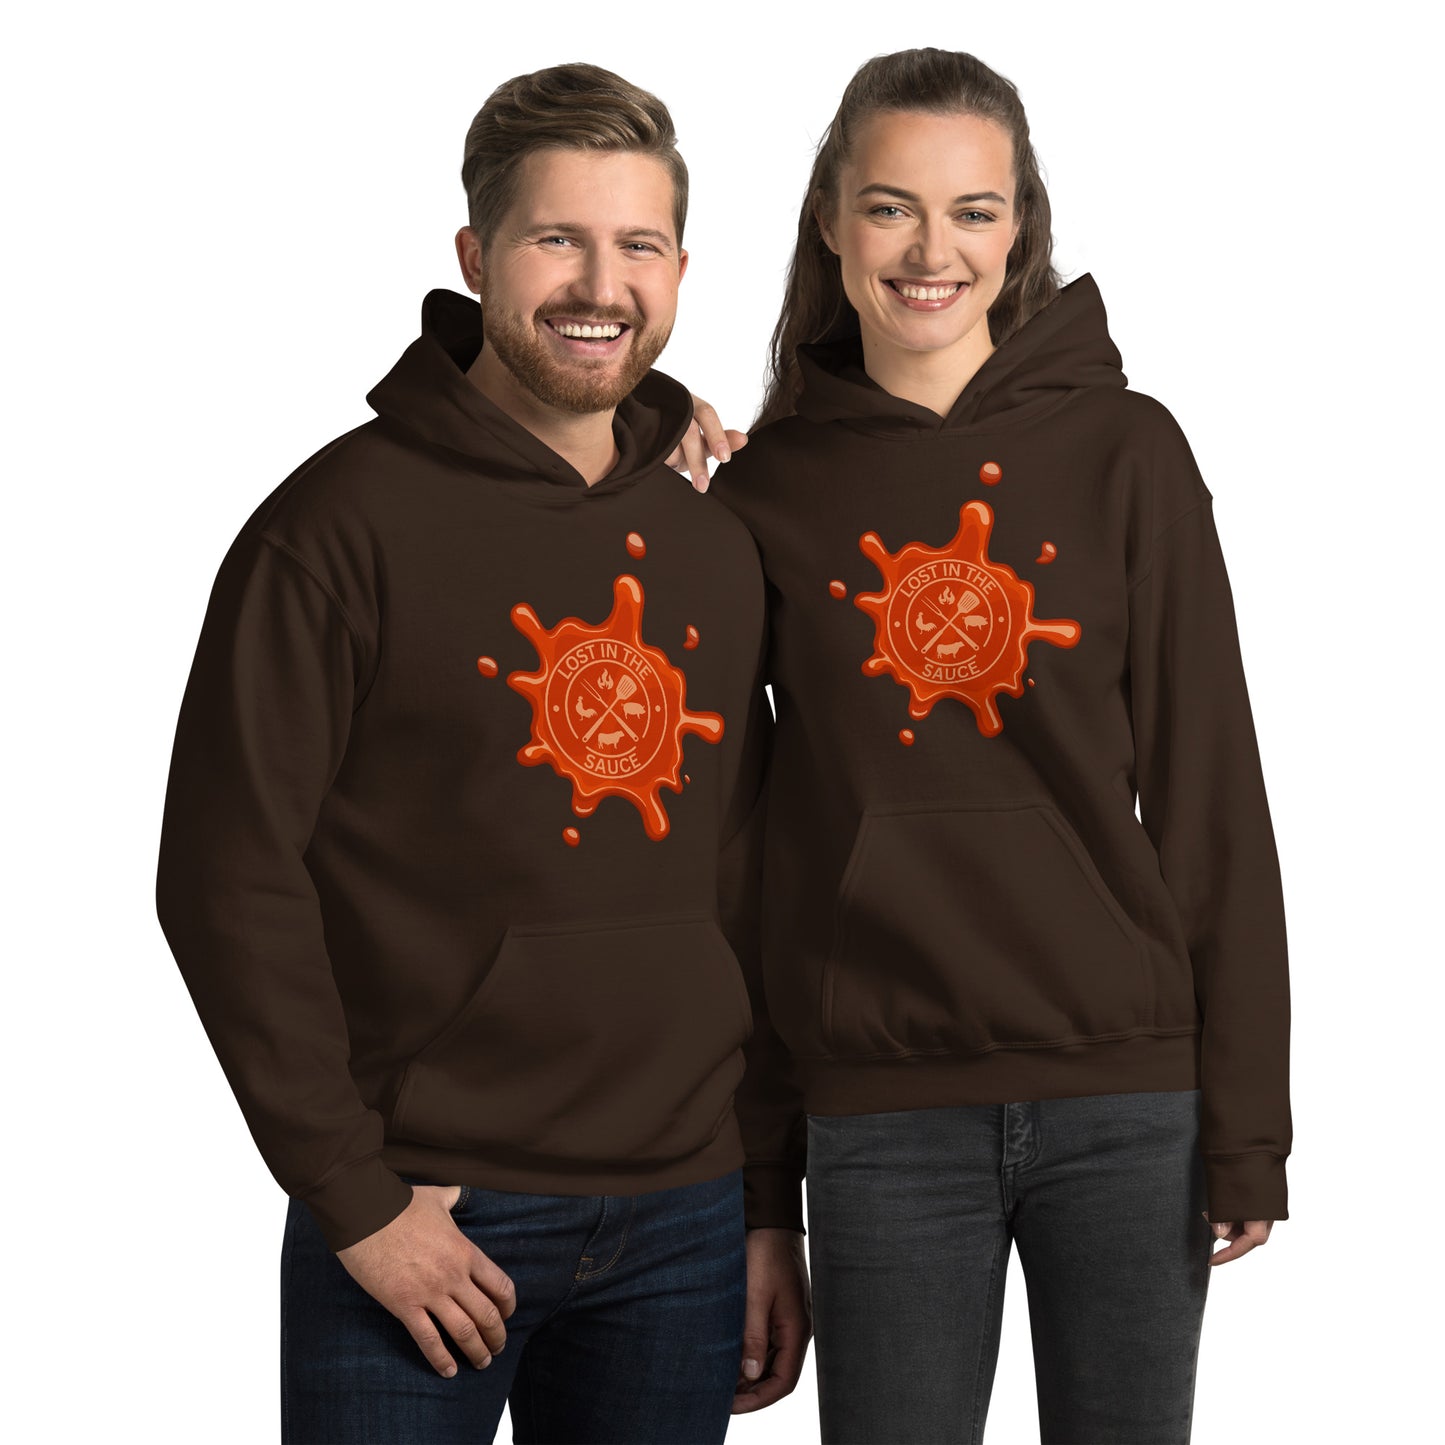 LOST IN THE SAUCE (BBQ) Unisex Hoodie